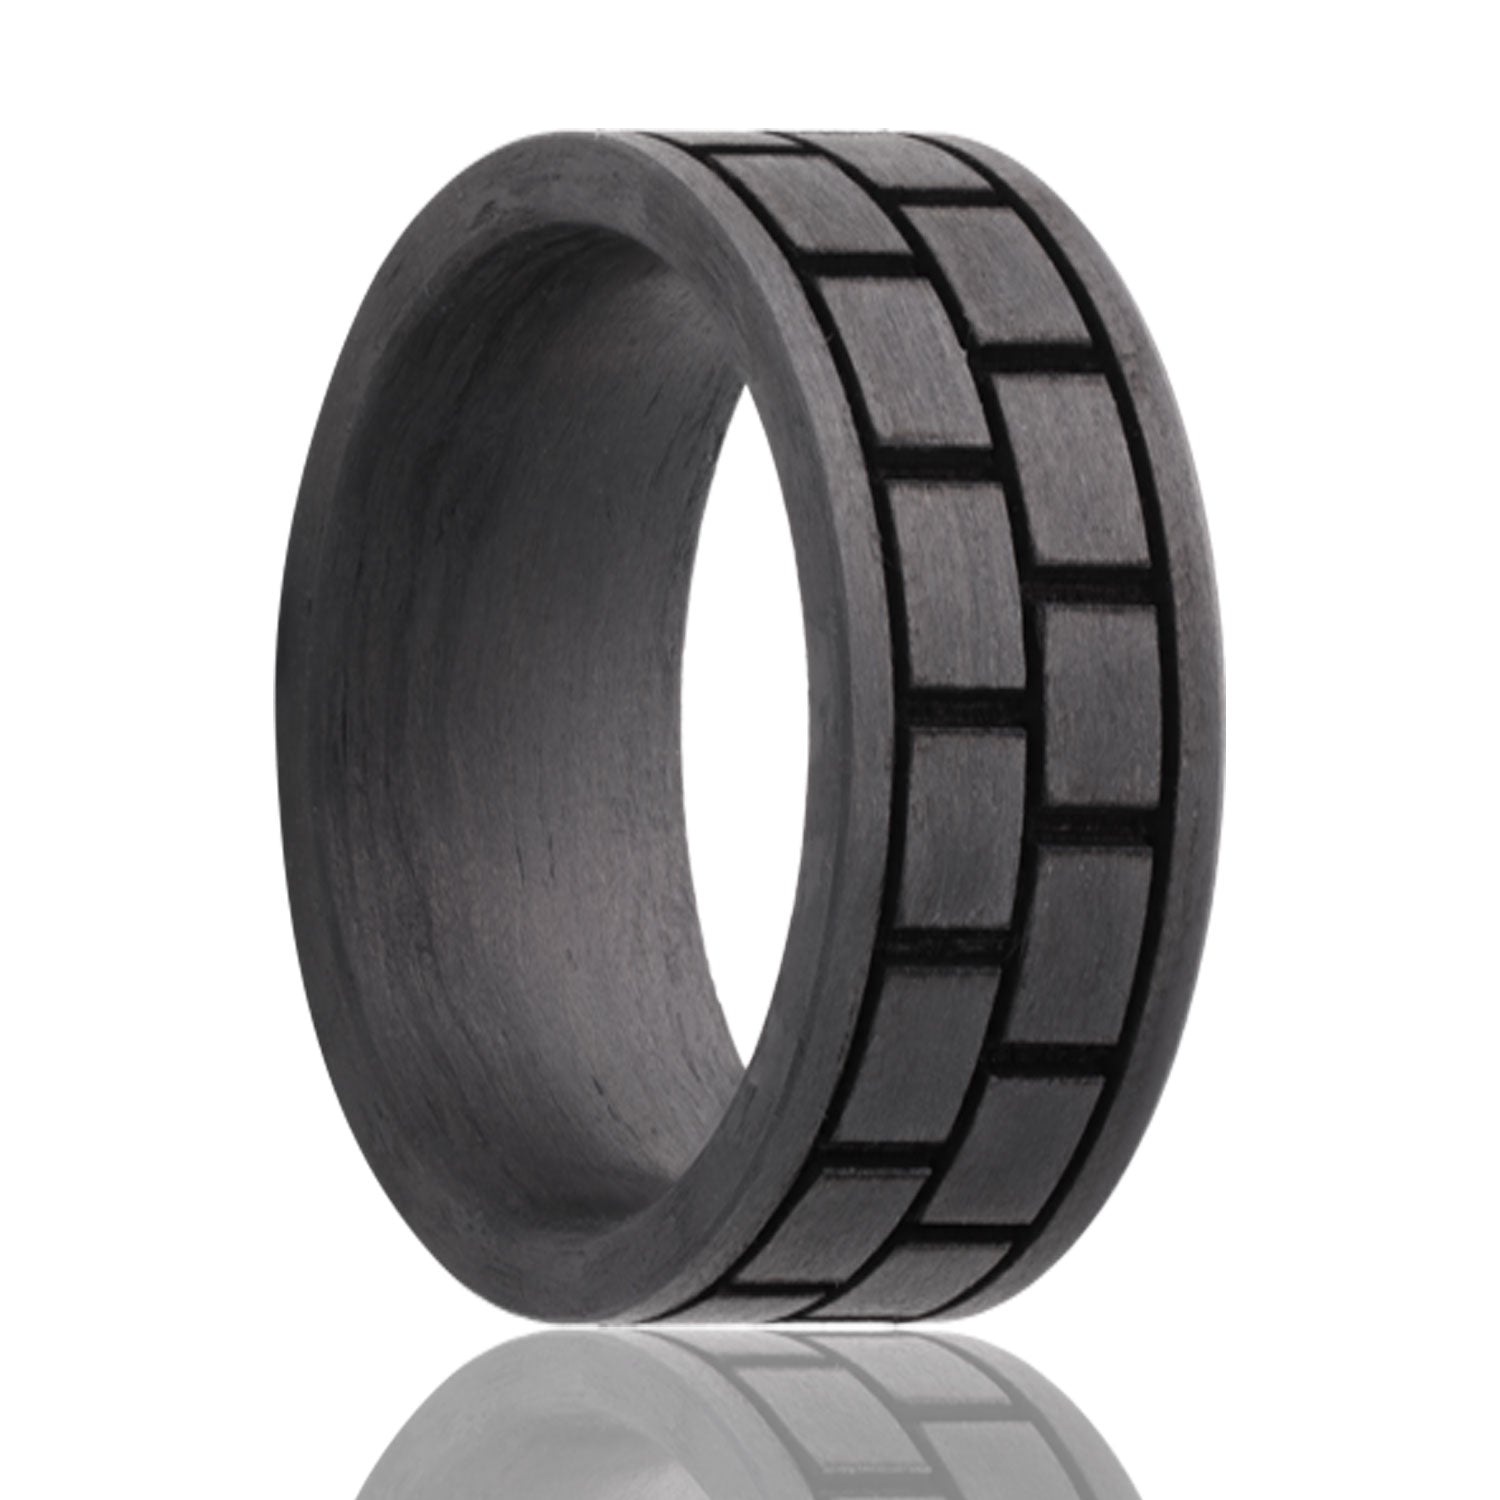 A checkered pattern carbon fiber men's wedding band displayed on a neutral white background.